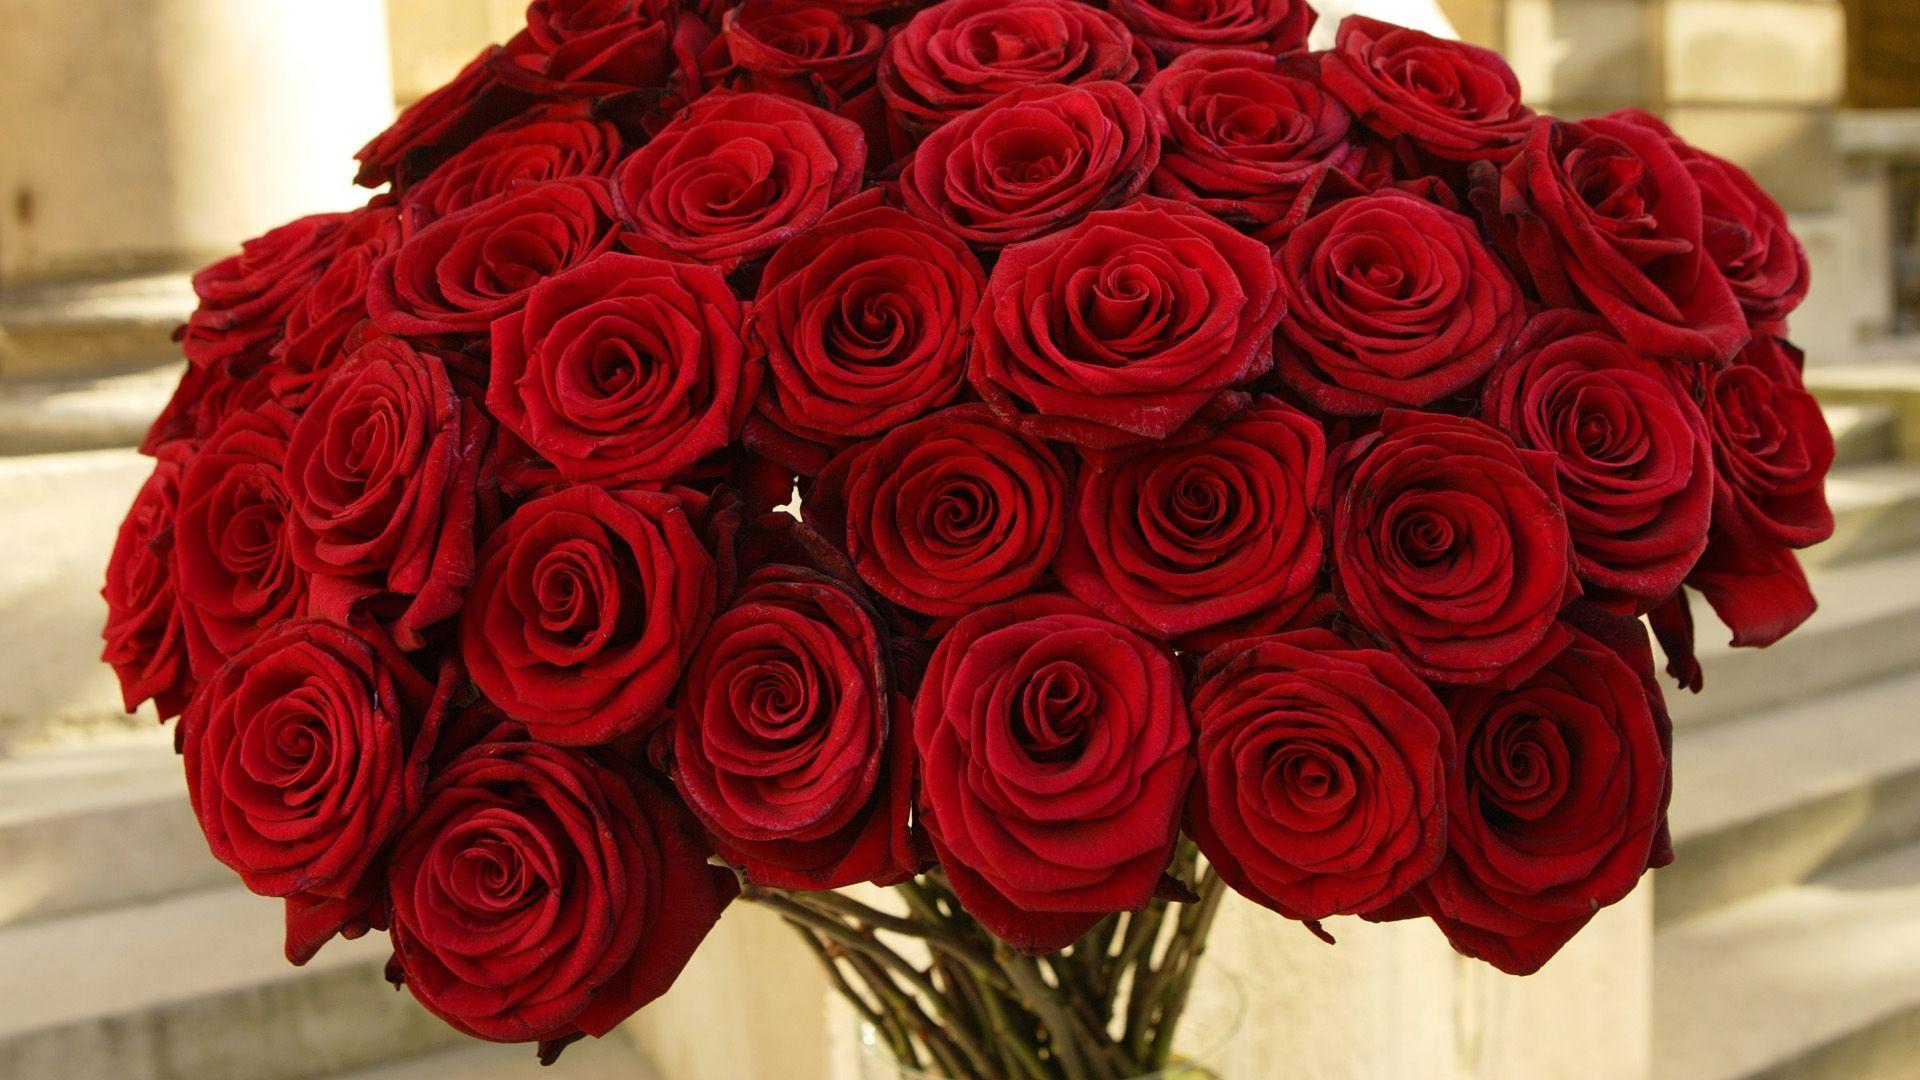 Red Roses Wallpaper. Flowers. Red roses and Flowers